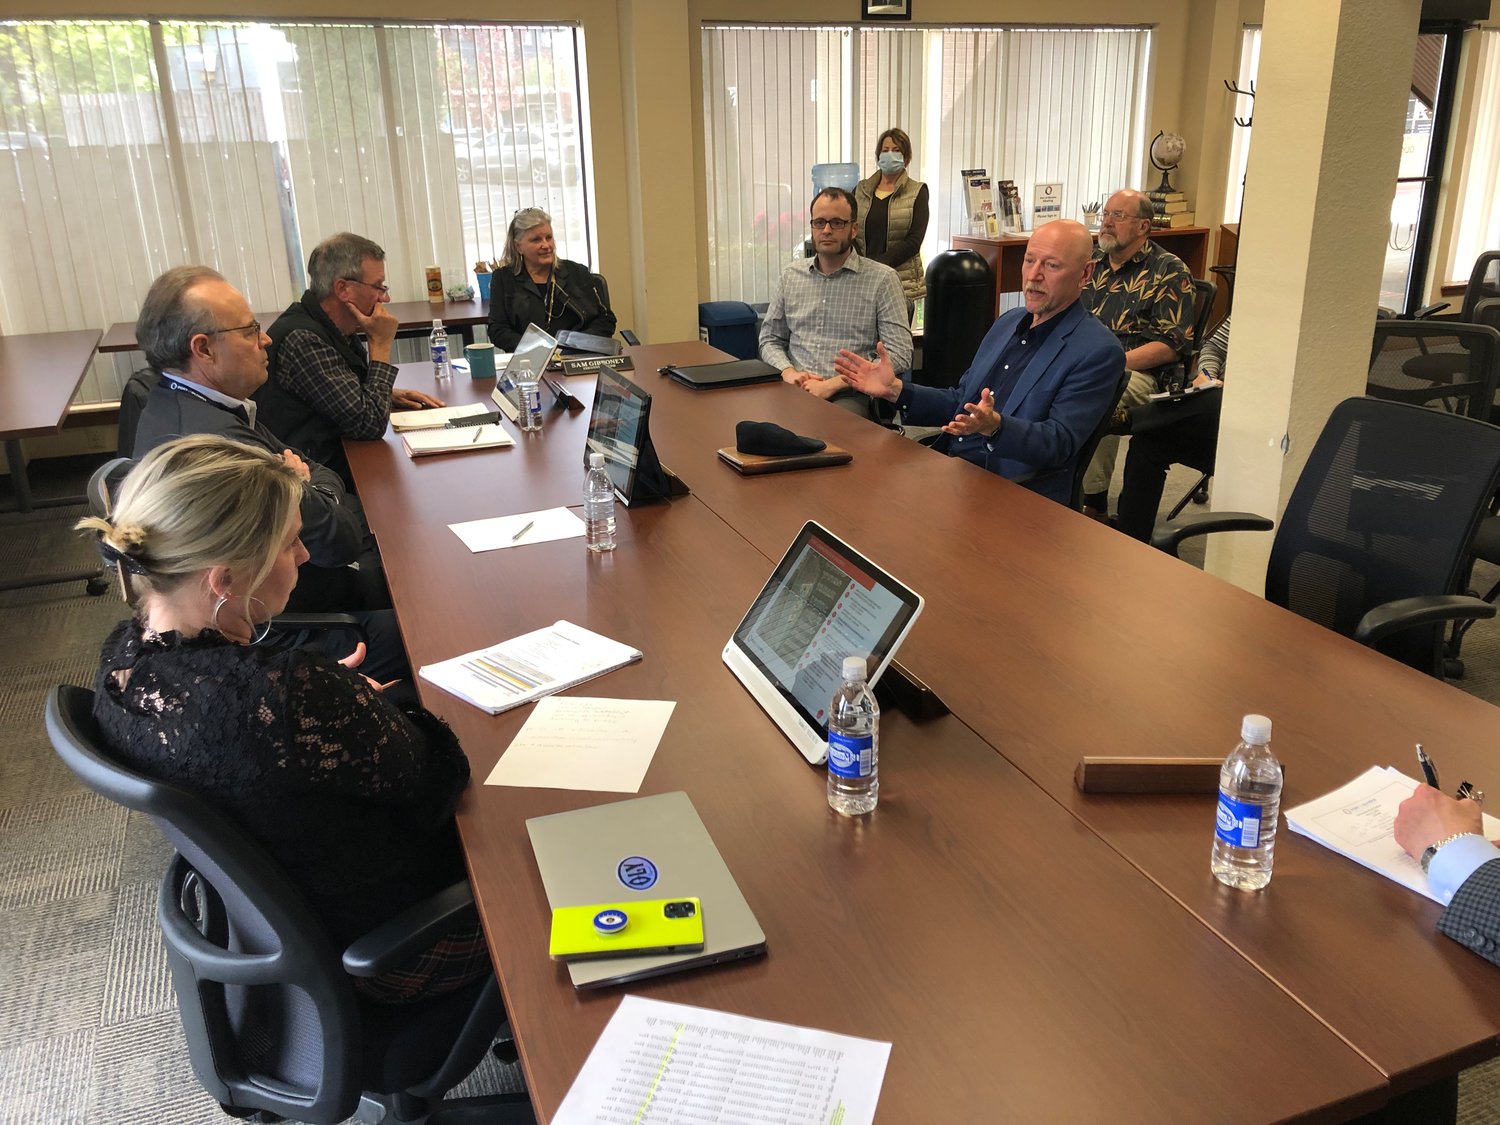 Seated around the conference table are, l-r, Port Commissioners Amy Evans, Bob Iyall, Joe Downing, executive director Sam Gibboney, Thomas Architecture Studios’ Amos Callender and Ron Thomas.